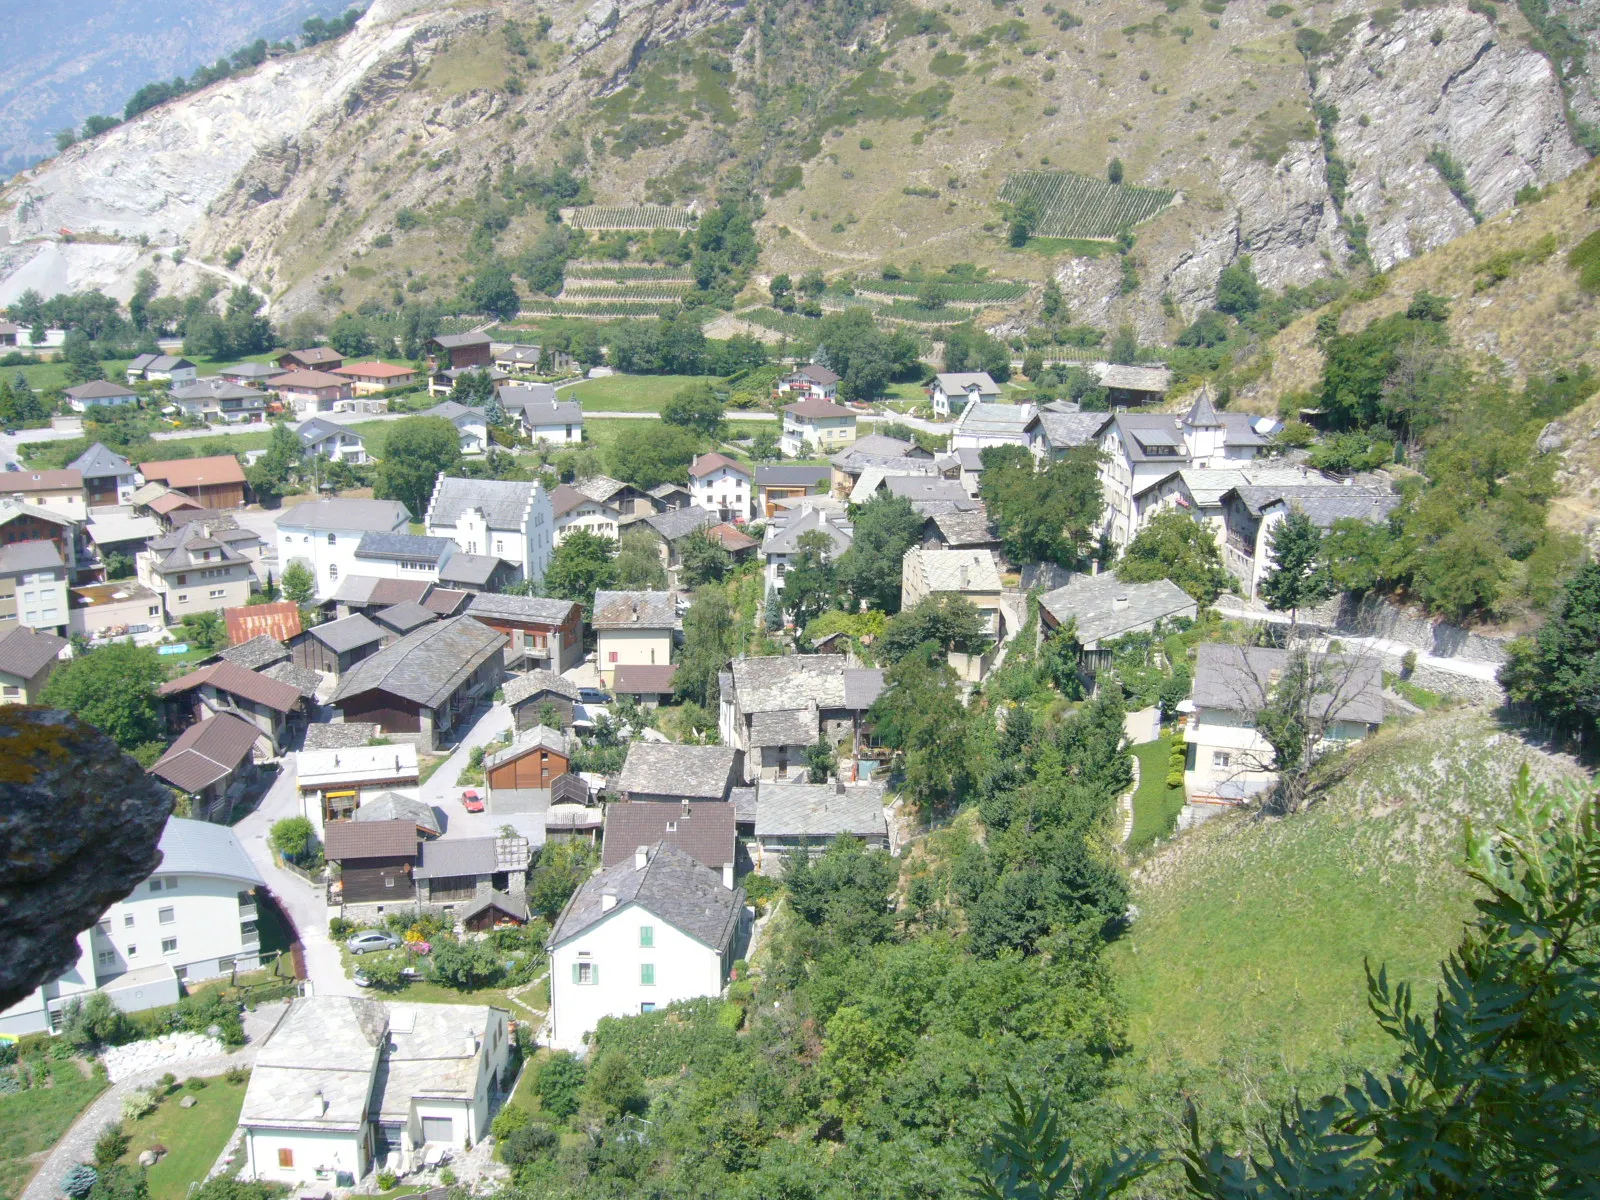 Photo showing: Village of Raron, Canton Vallais, Switzerland. Picture taken by Peter Berger on July 16, 2006.